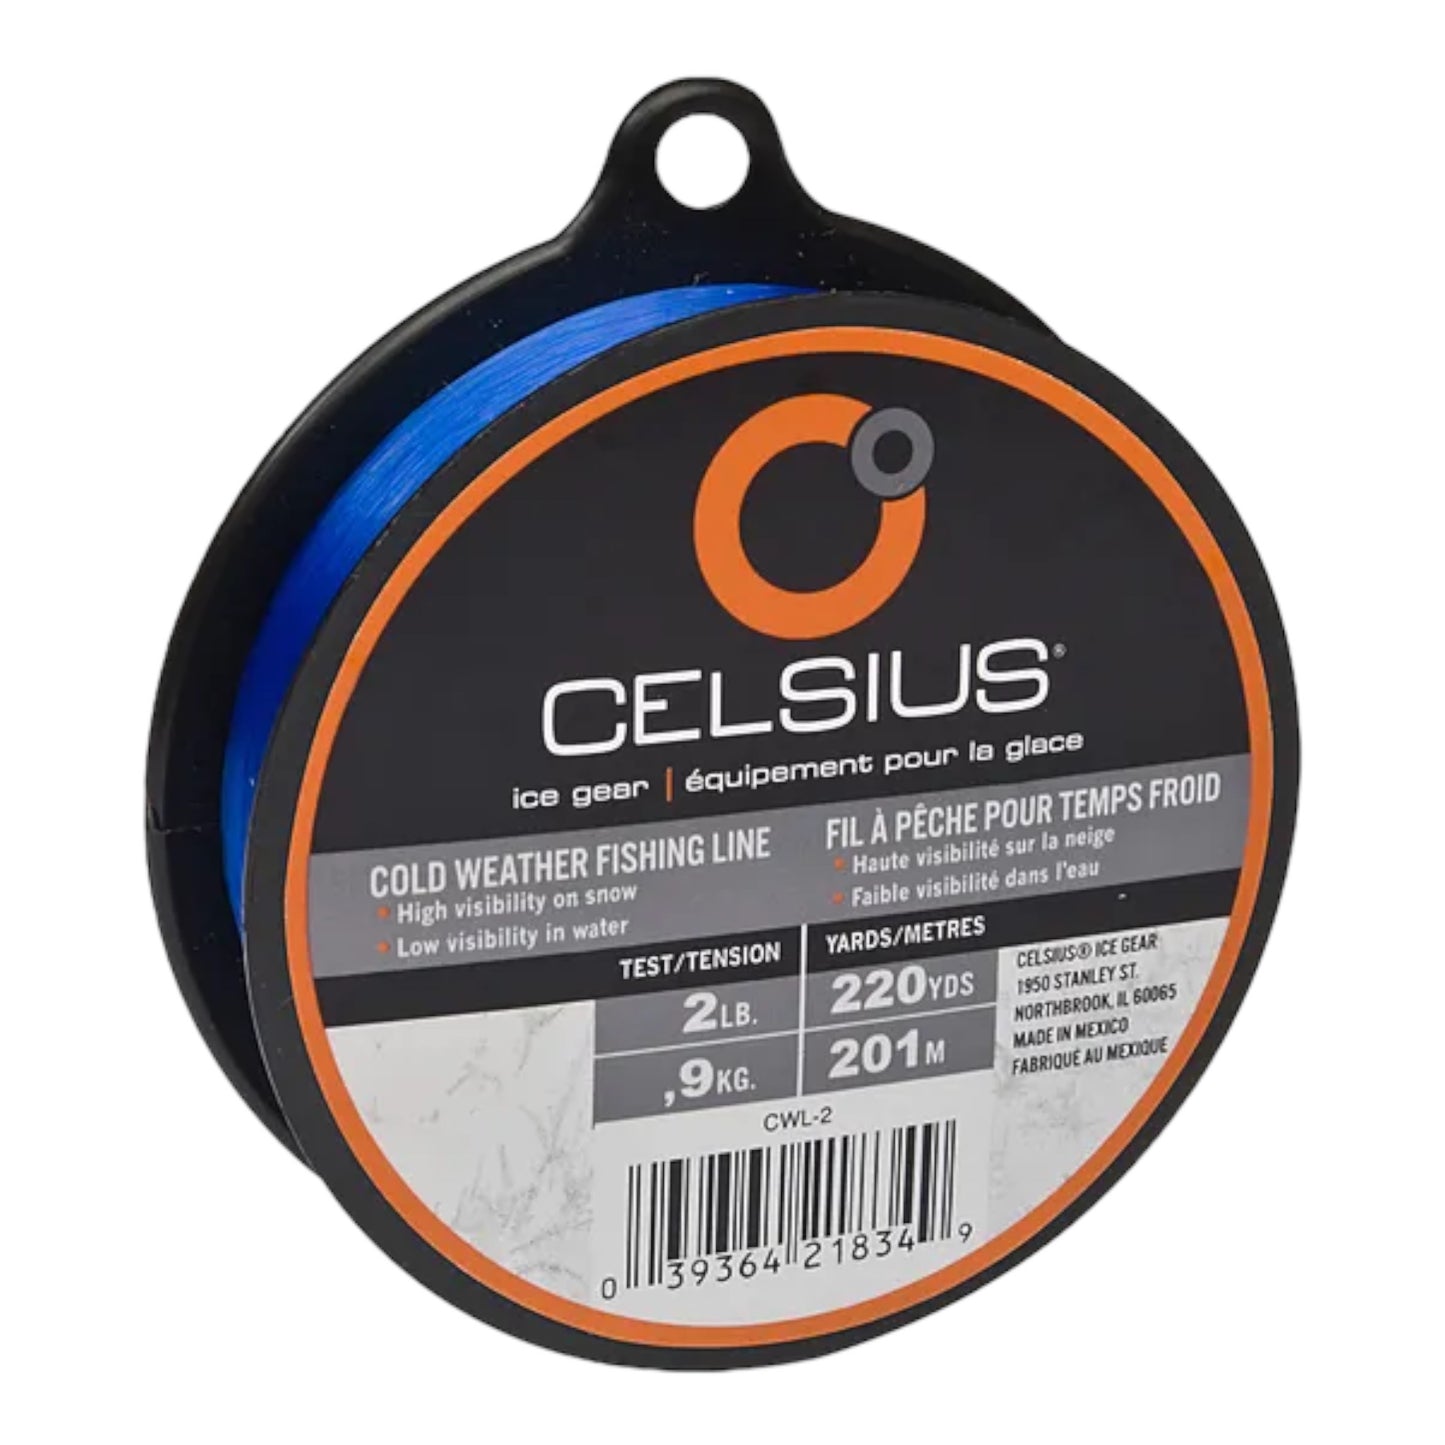 Celsius Cold Weather Fishing Line